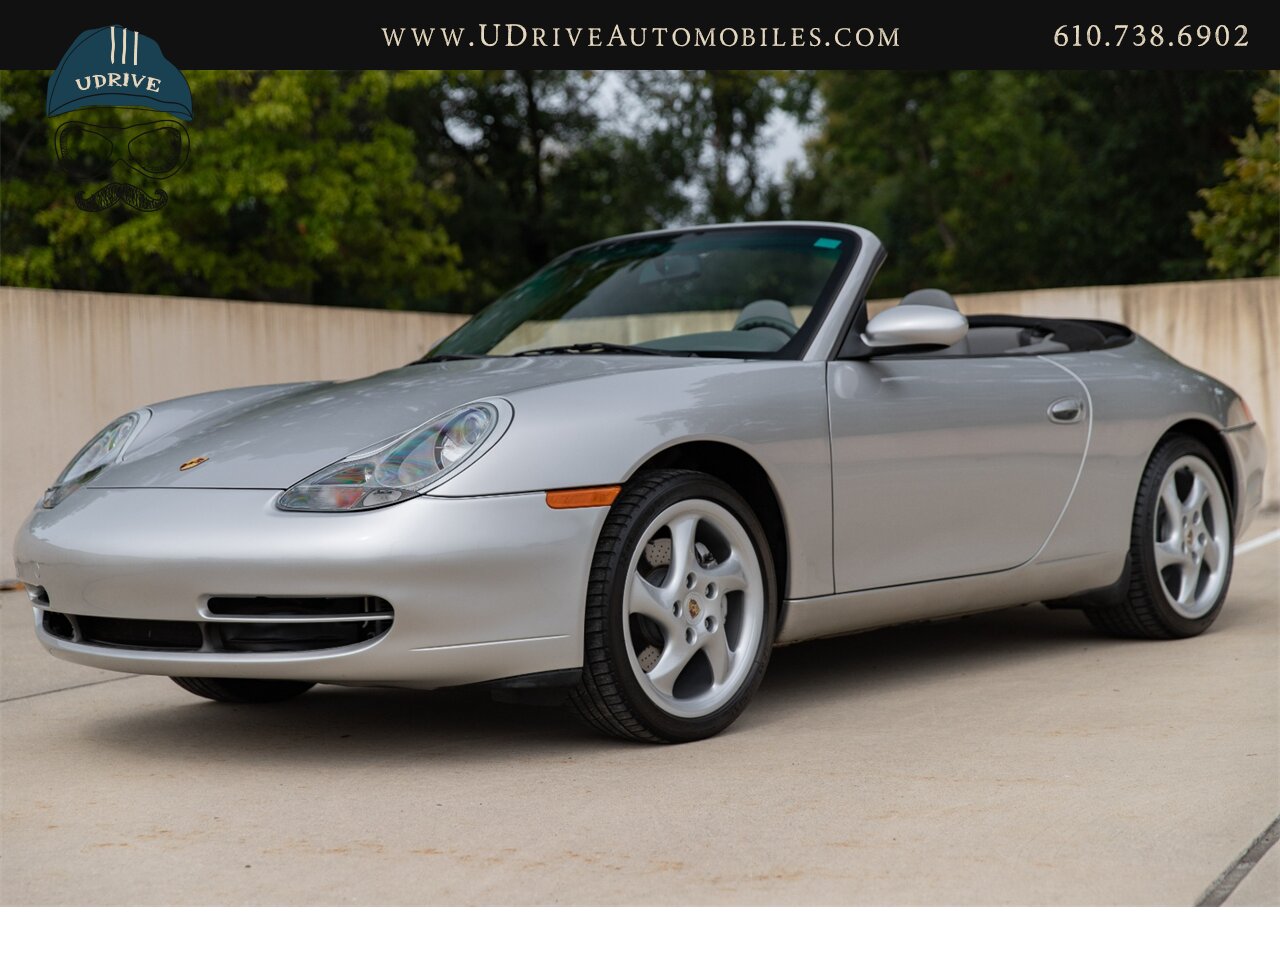 2001 Porsche 911 Carrera 4 Cabriolet Tiptronic IMS Upgrade  Power Seats 18in Turbo Look Wheels 2 Owners $5k Recent Service - Photo 12 - West Chester, PA 19382